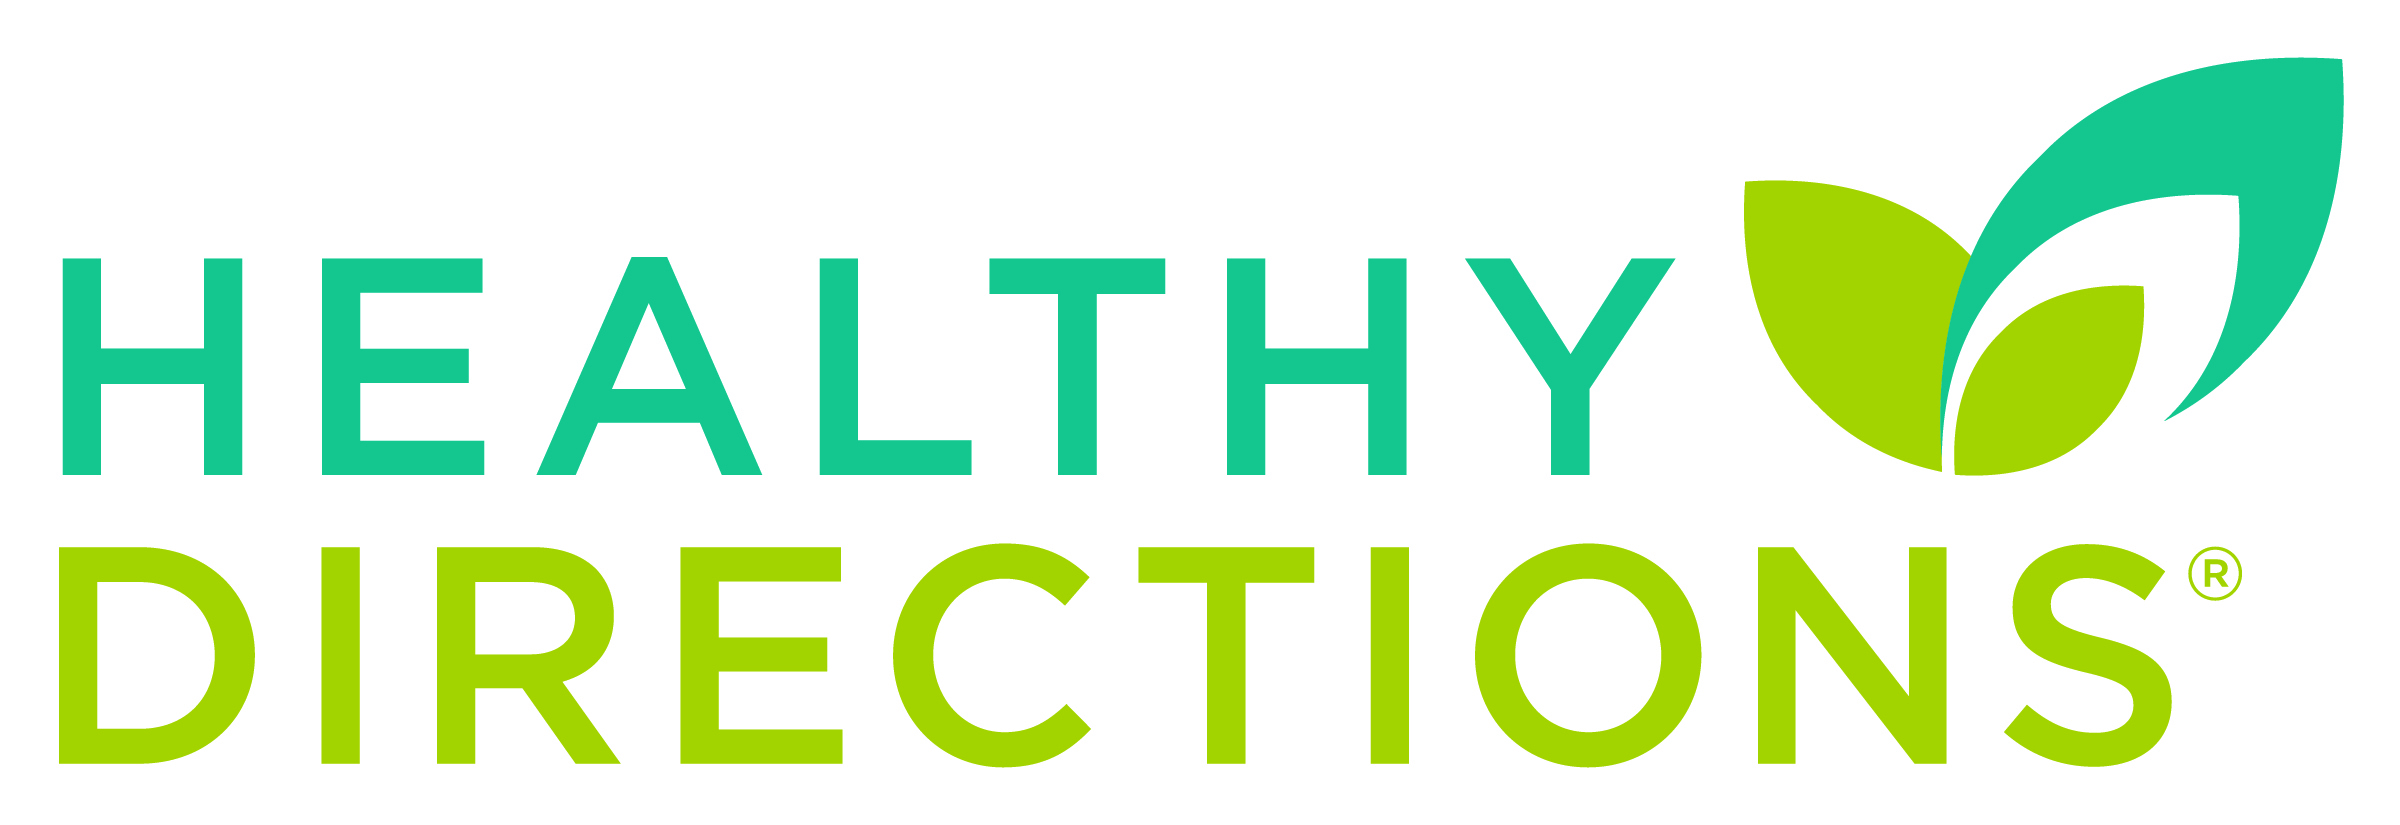 Healthy Directions LLC is a leading health publisher and direct-to-consumer retailer of doctor-formulated nutritional supplements and skincare products